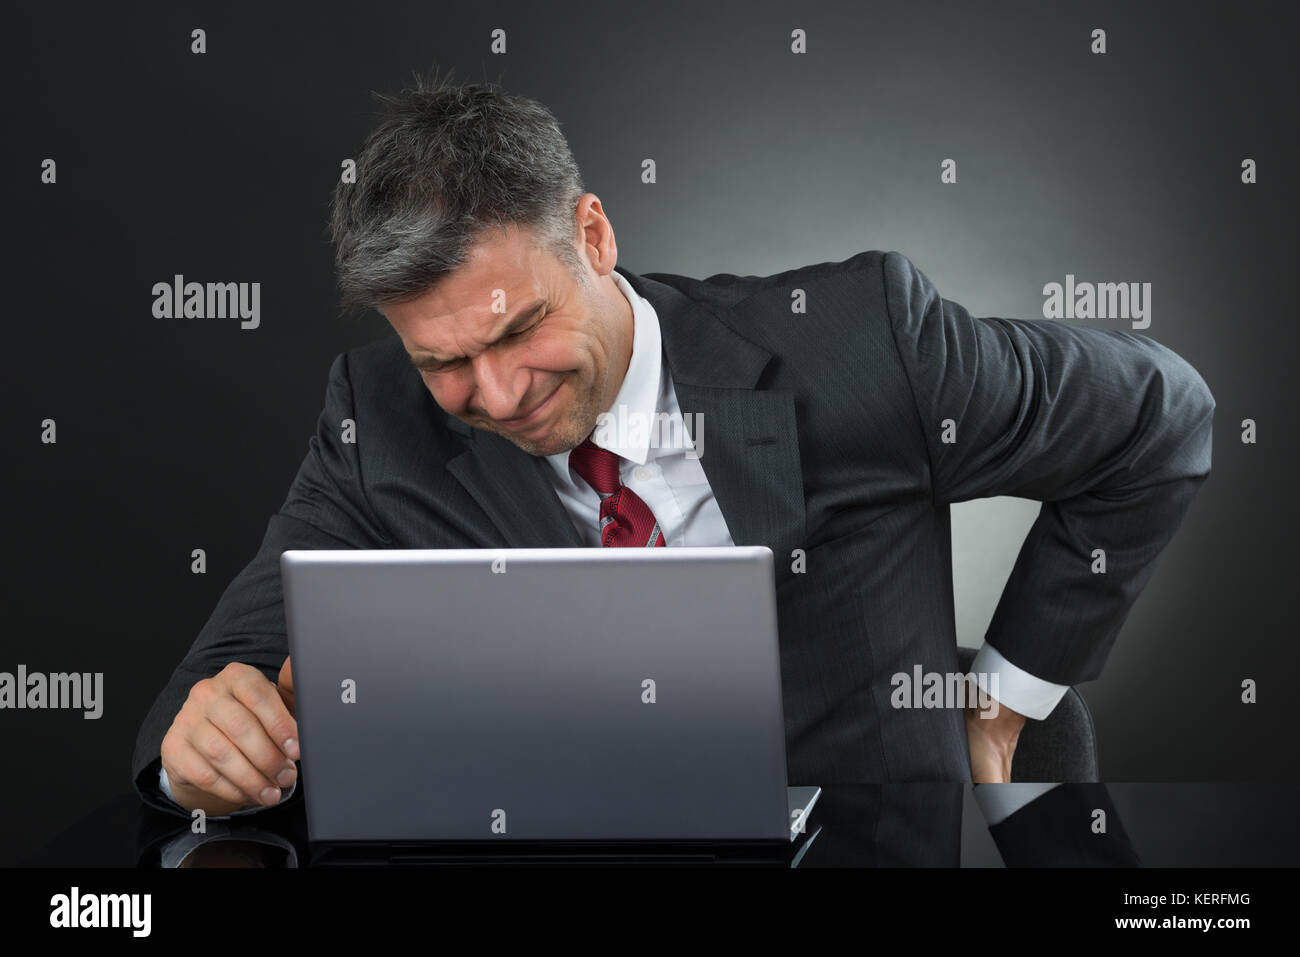 Mature Businessman Suffering From Back Pain While Working On Laptop At Desk Stock Photo